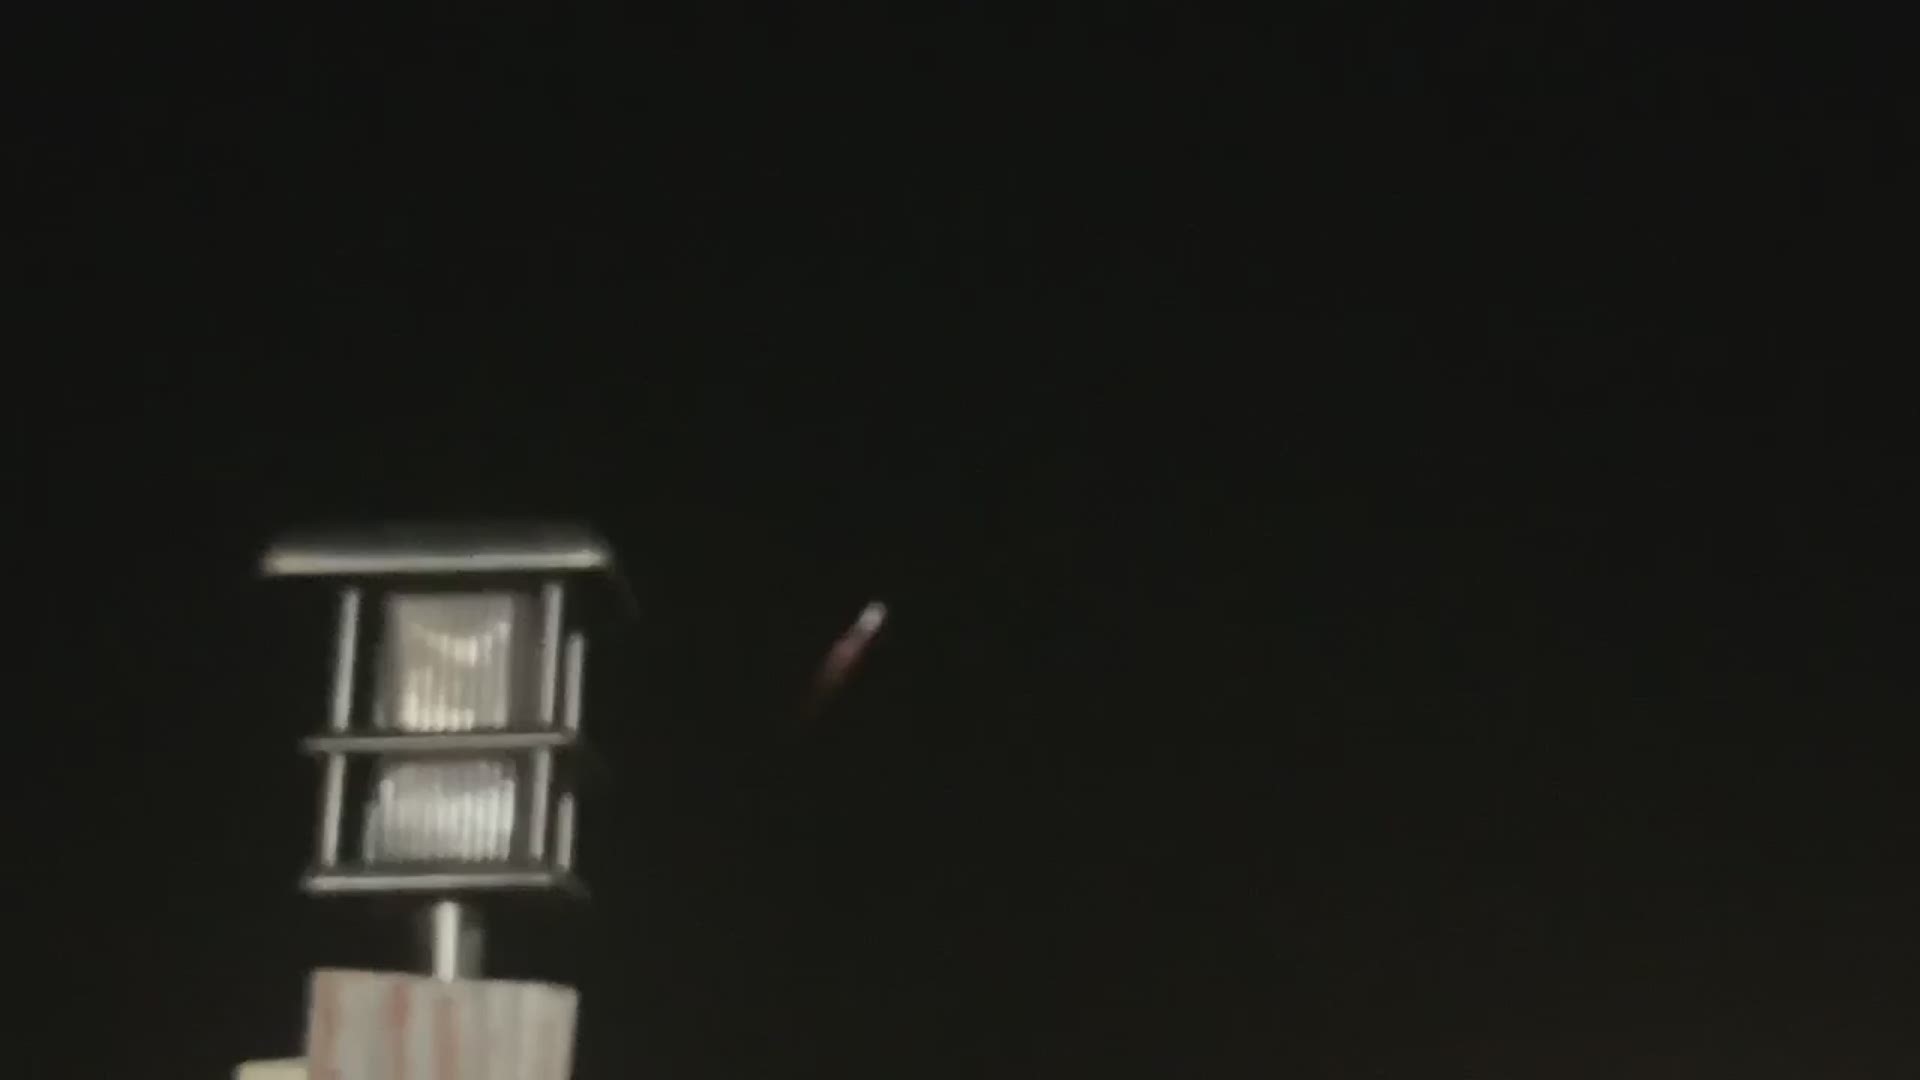 Tara Oneal captured the space debris falling over West Texas